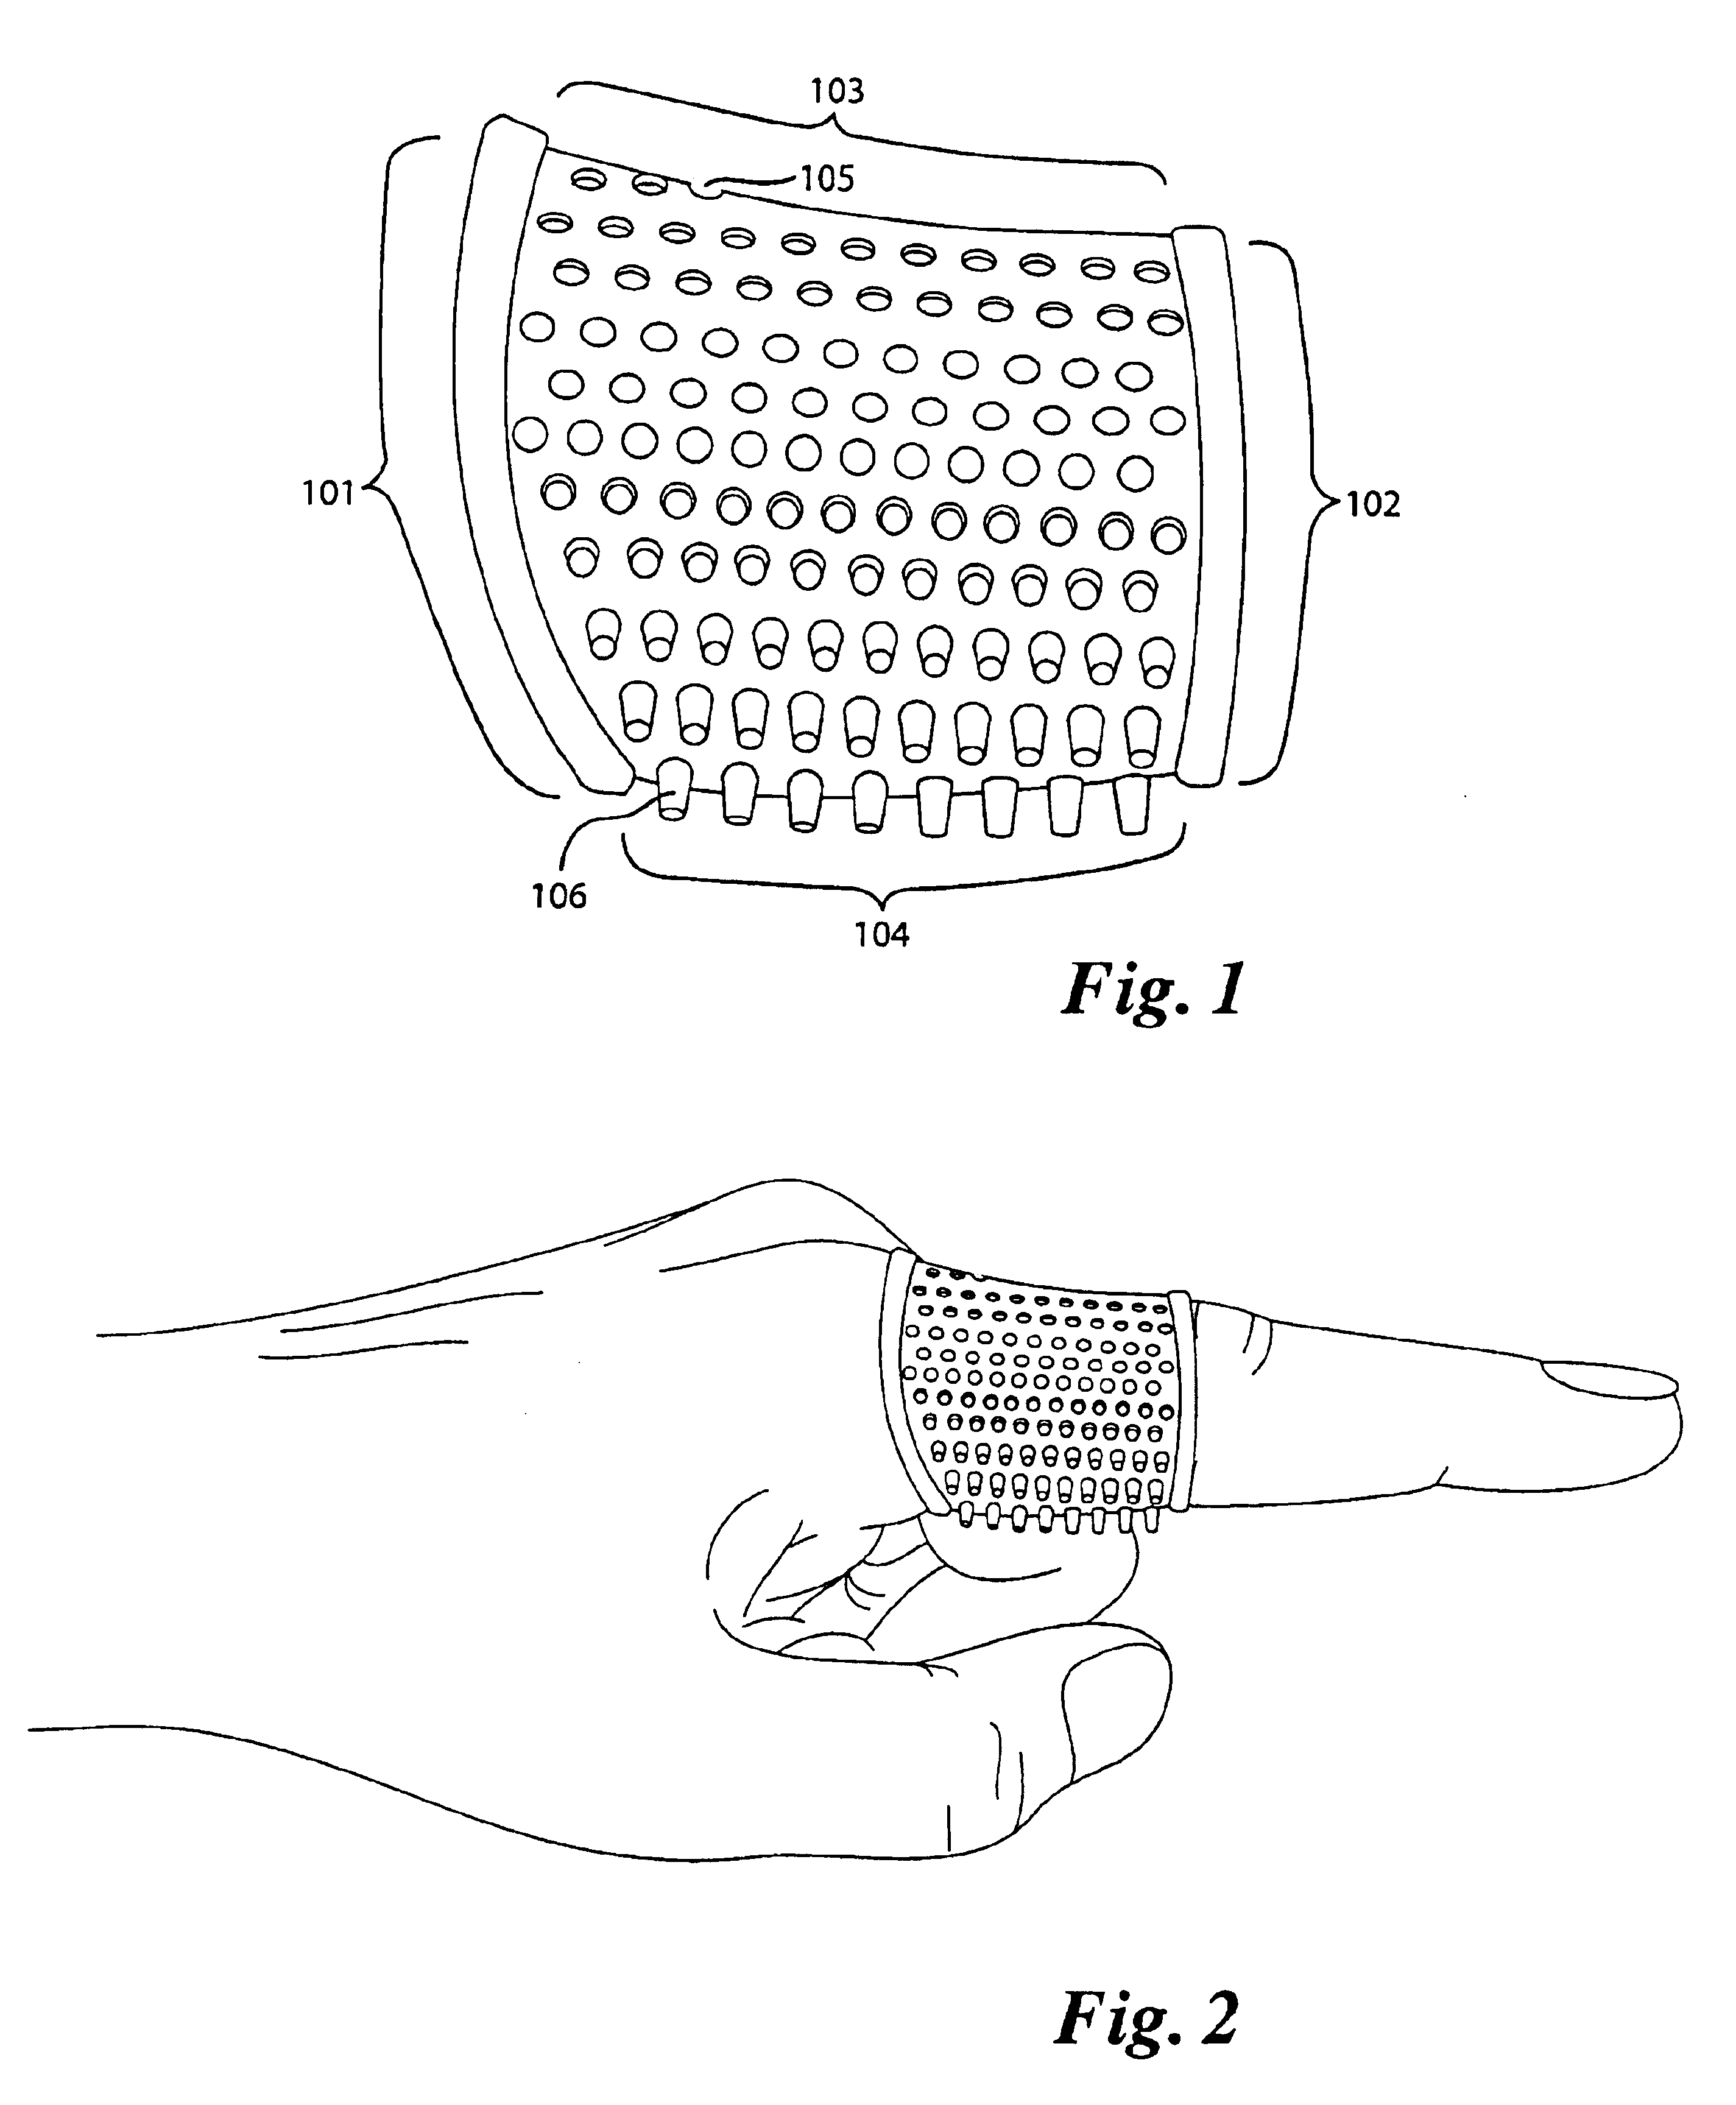 Skin protection device for fingers and/or thumbs